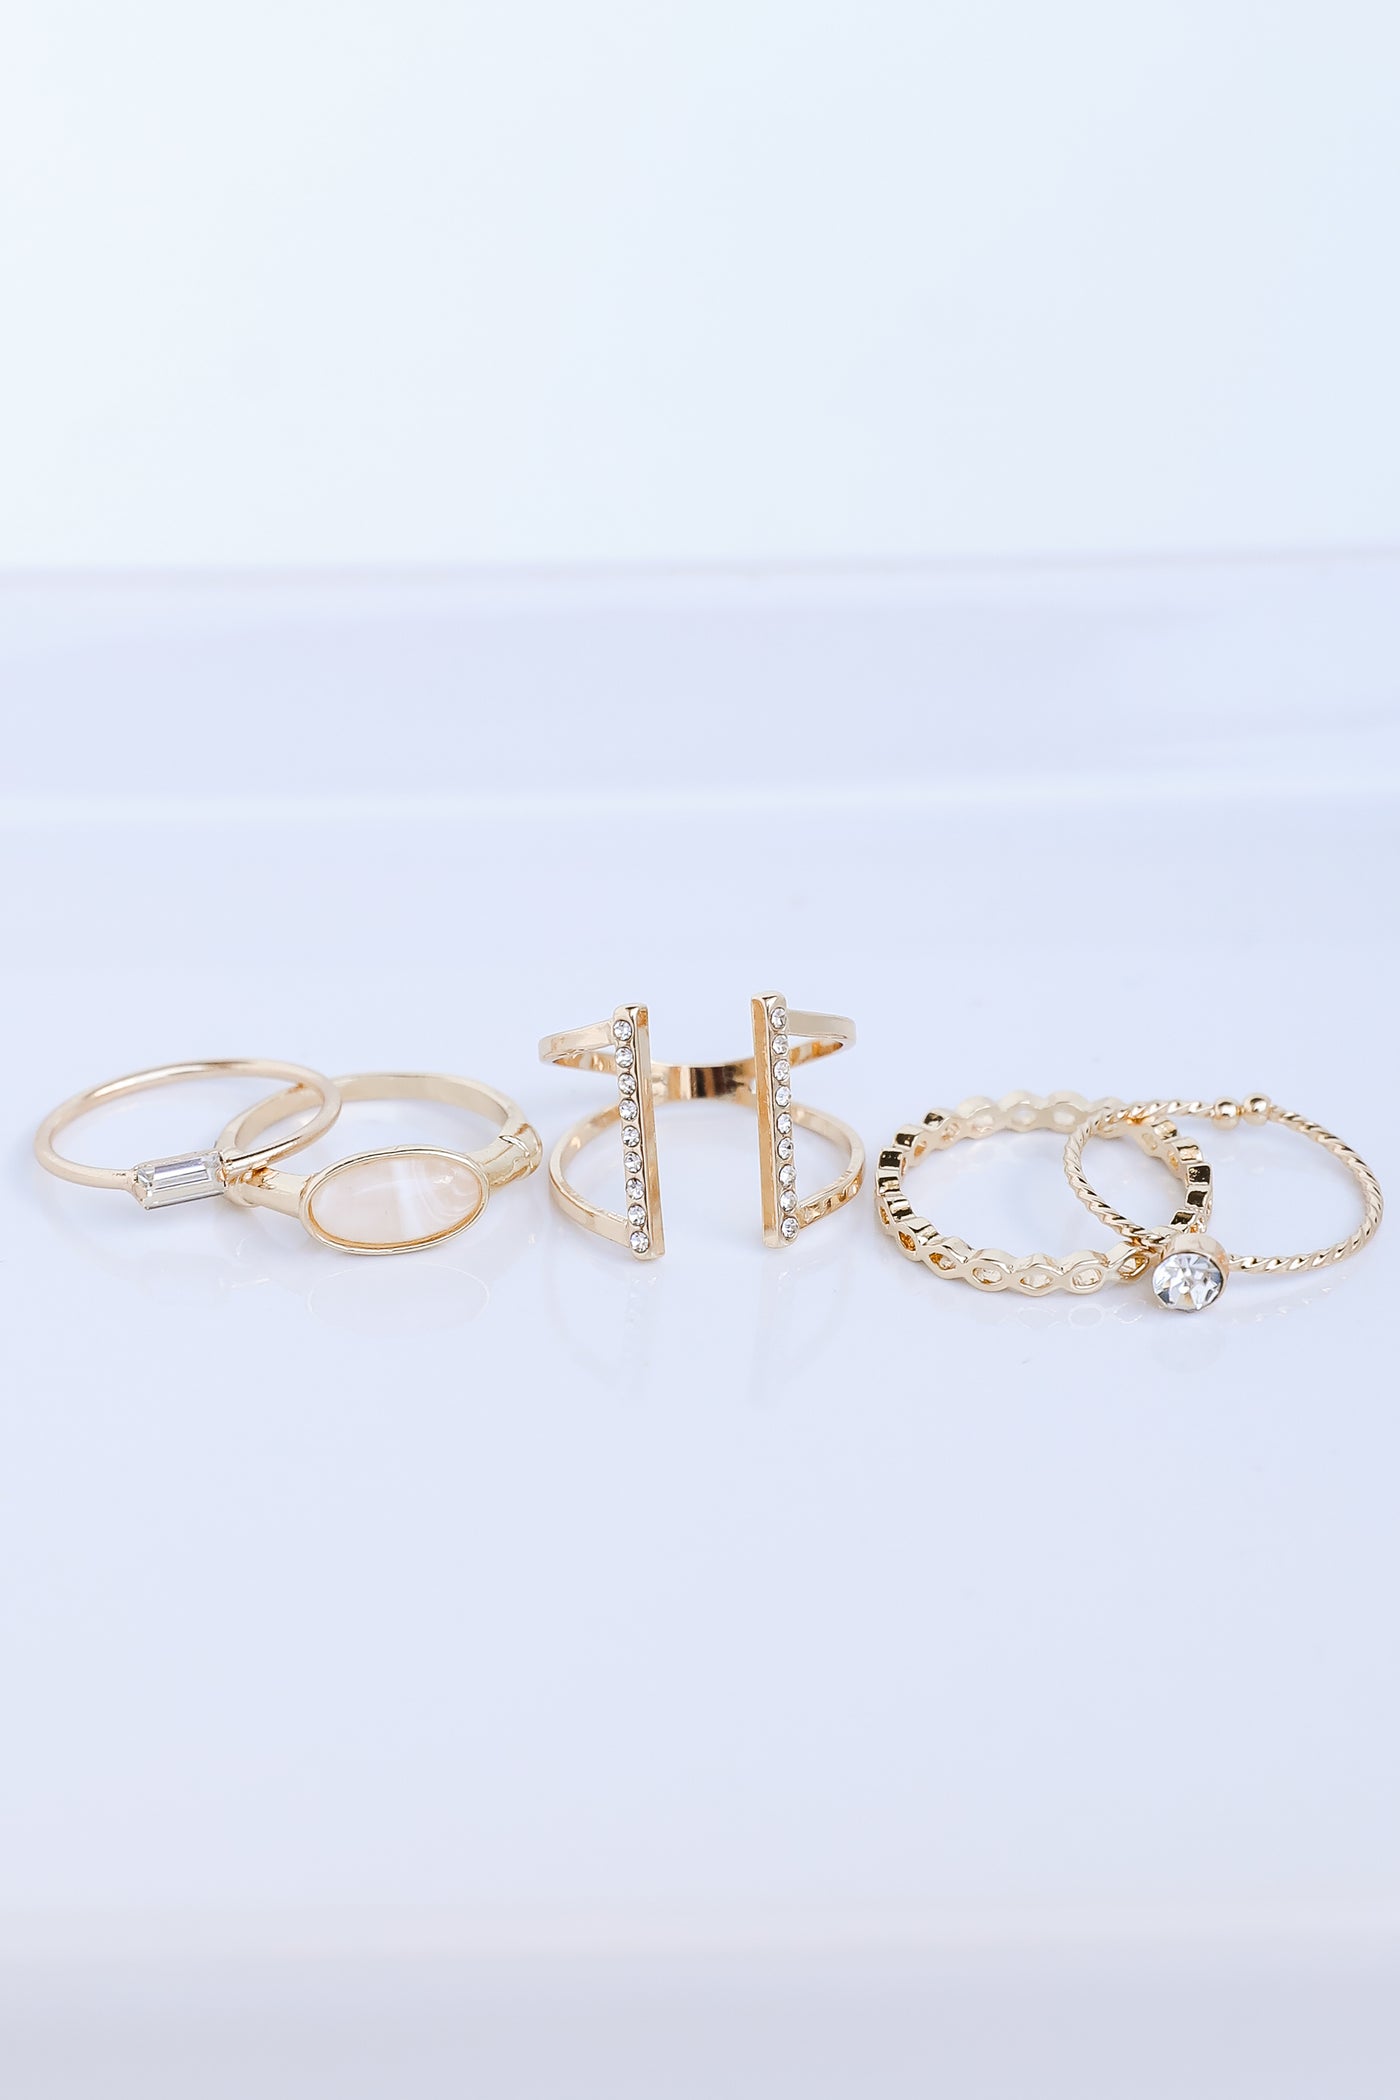 Ring Set in gold flat lay